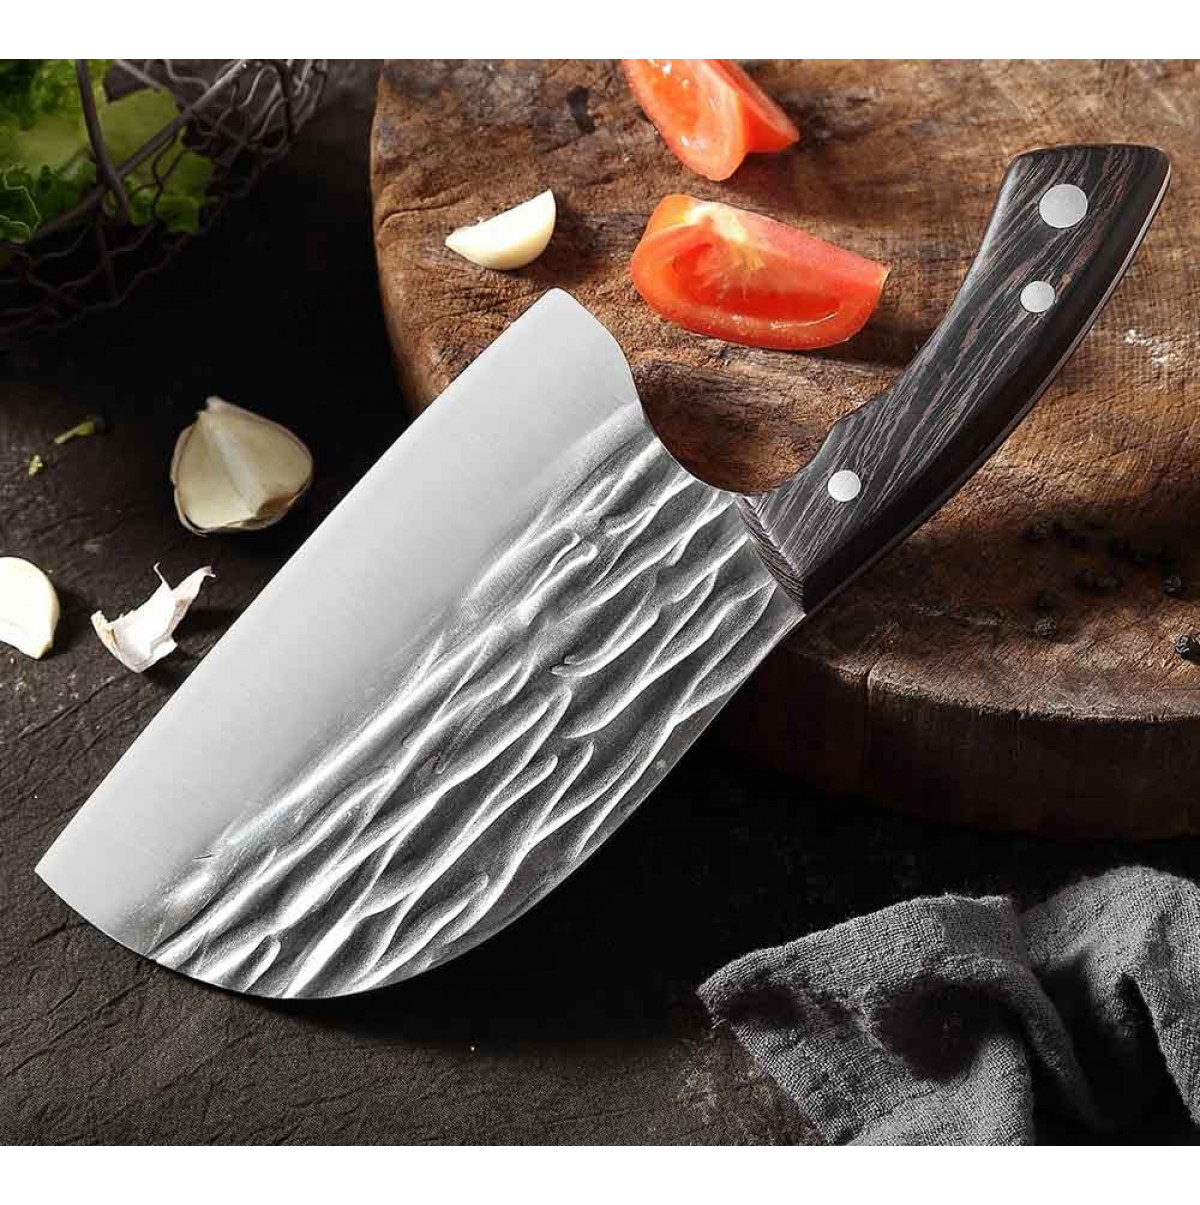 Androf Stainless Knife